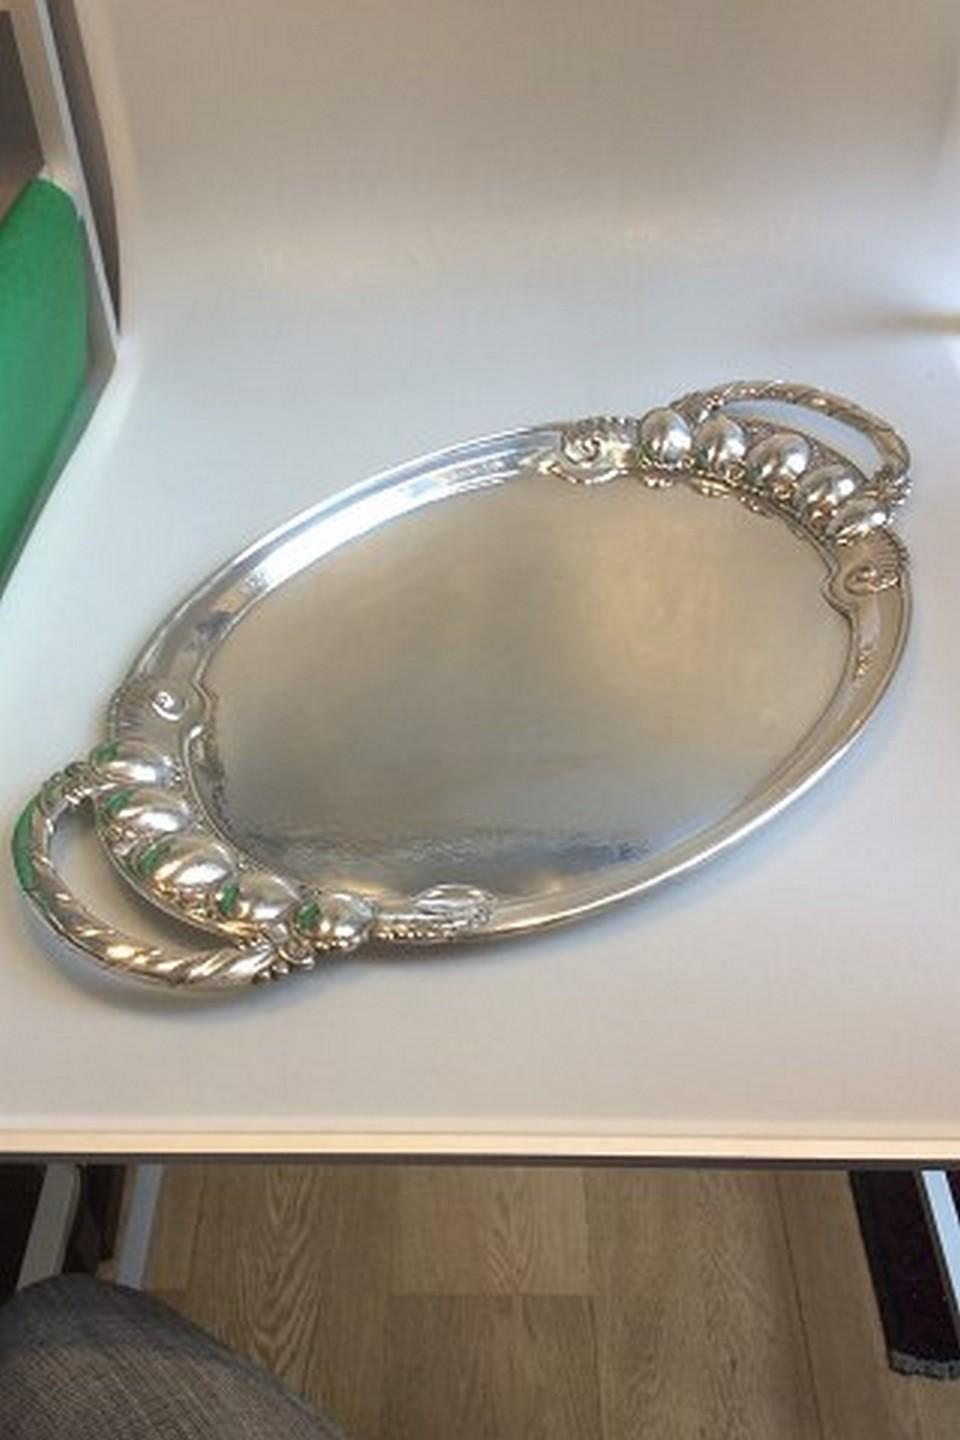 Georg Jensen sterling silver large serving tray in the melon pattern no. 159B.

Measures: 66cm (26in) long
Weight is 3132g (100.7 oz).

In perfect condition.
Item no.: 341826.